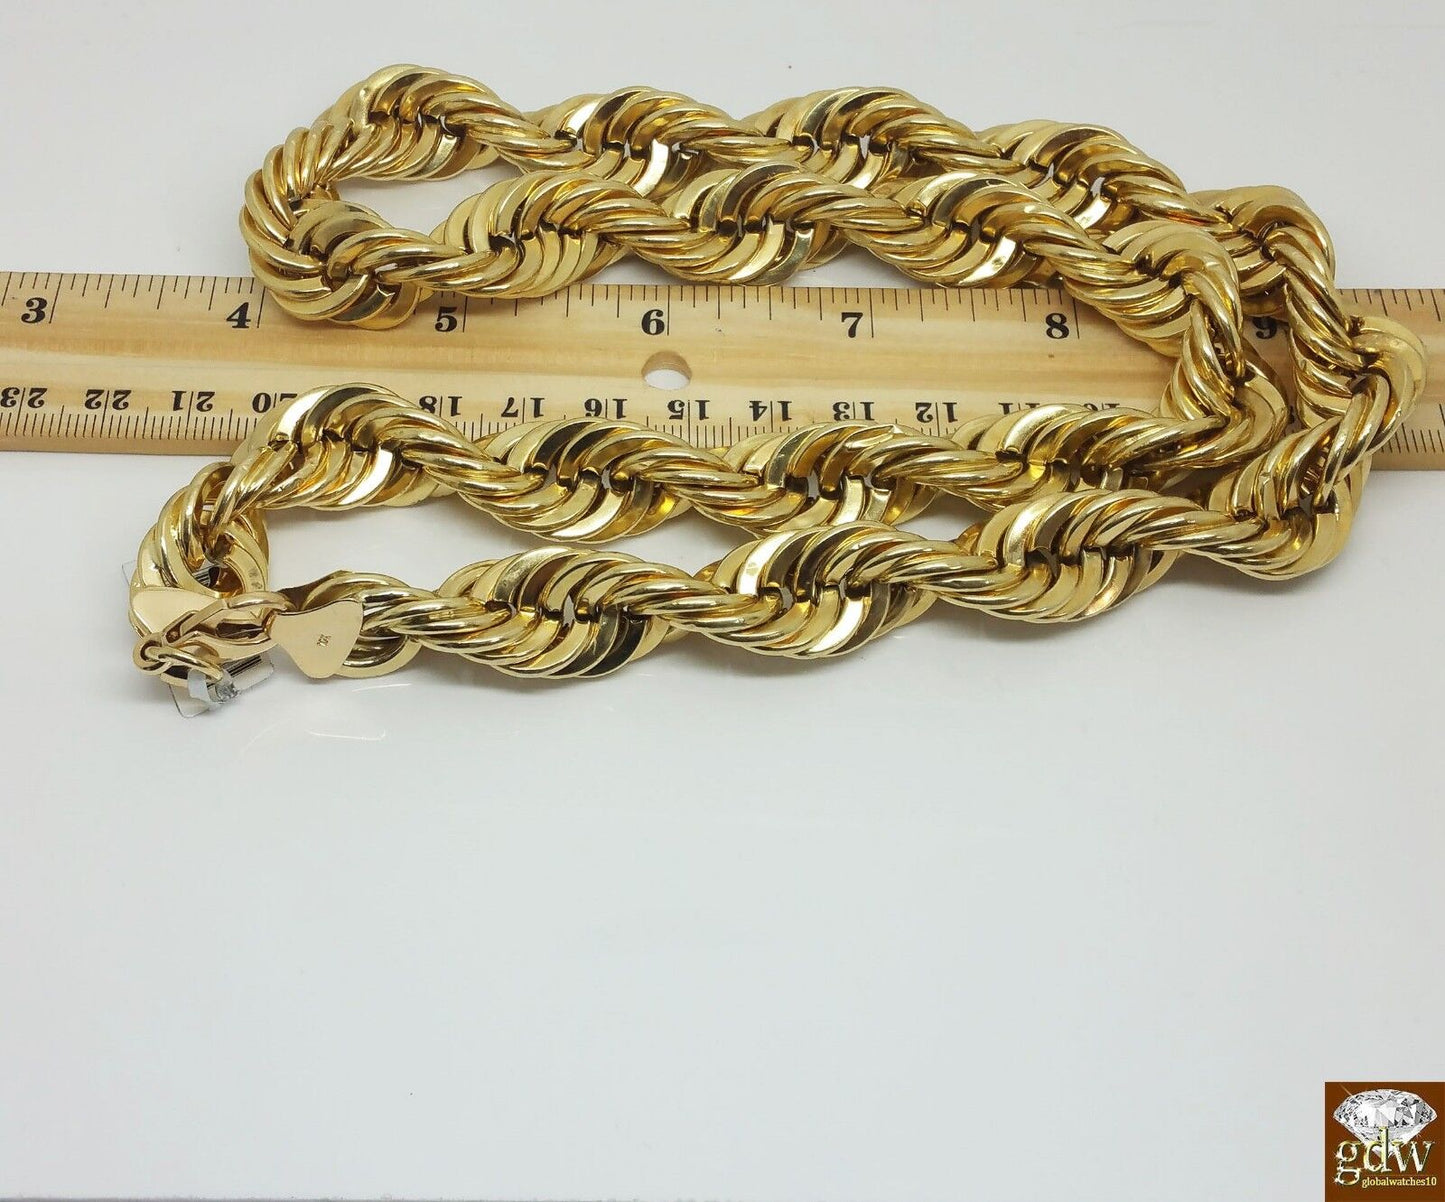 Real 10k Gold Rope Chain Necklace 26 Inch 15mm lobster Lock Authentic 10k